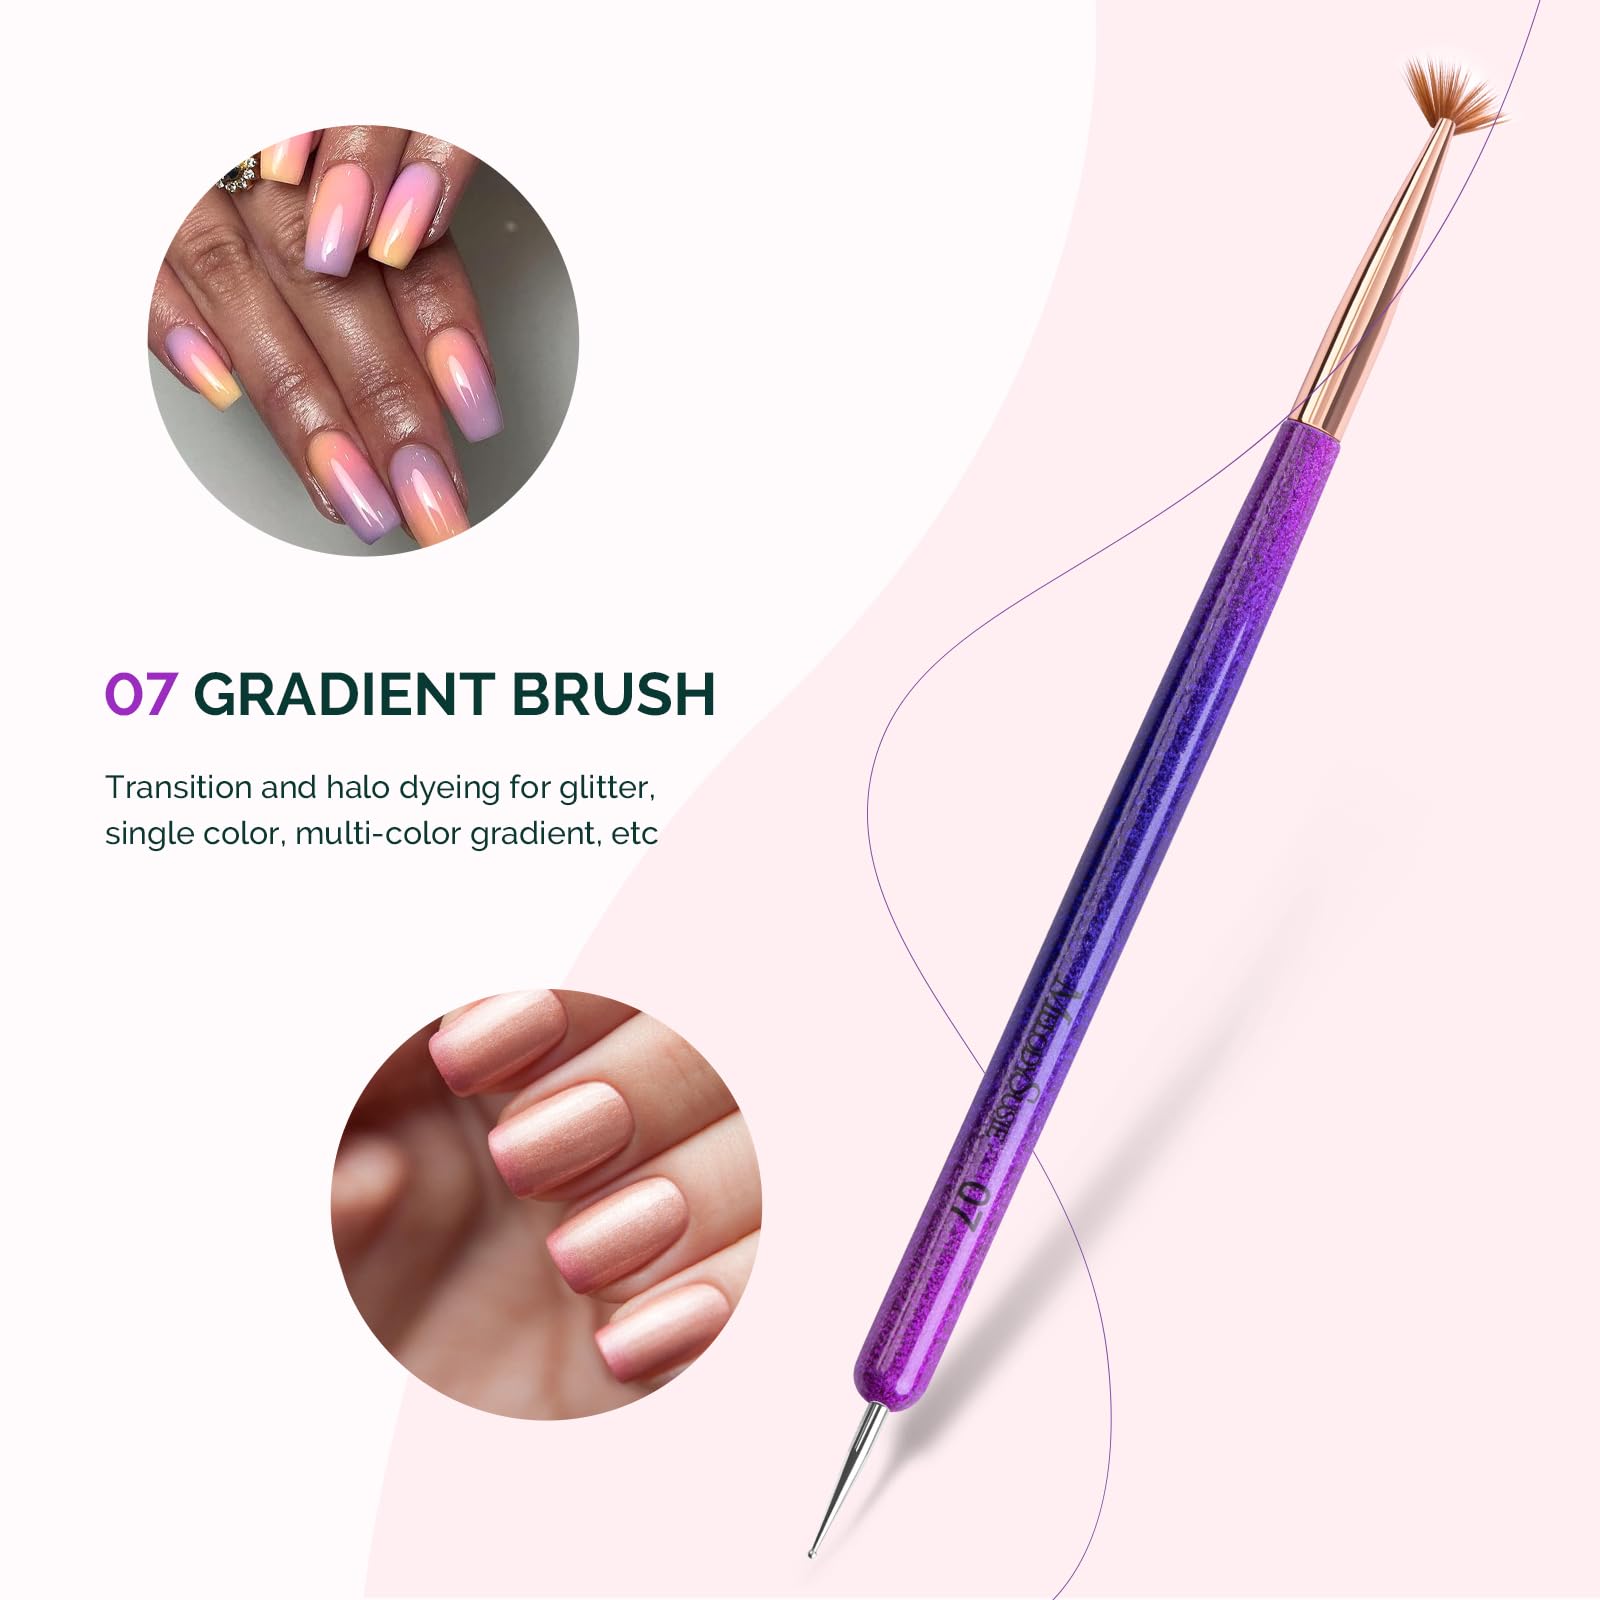 3 WAYS FOR A HASSLE -FREE GRADIENT ON YOUR NAILS!